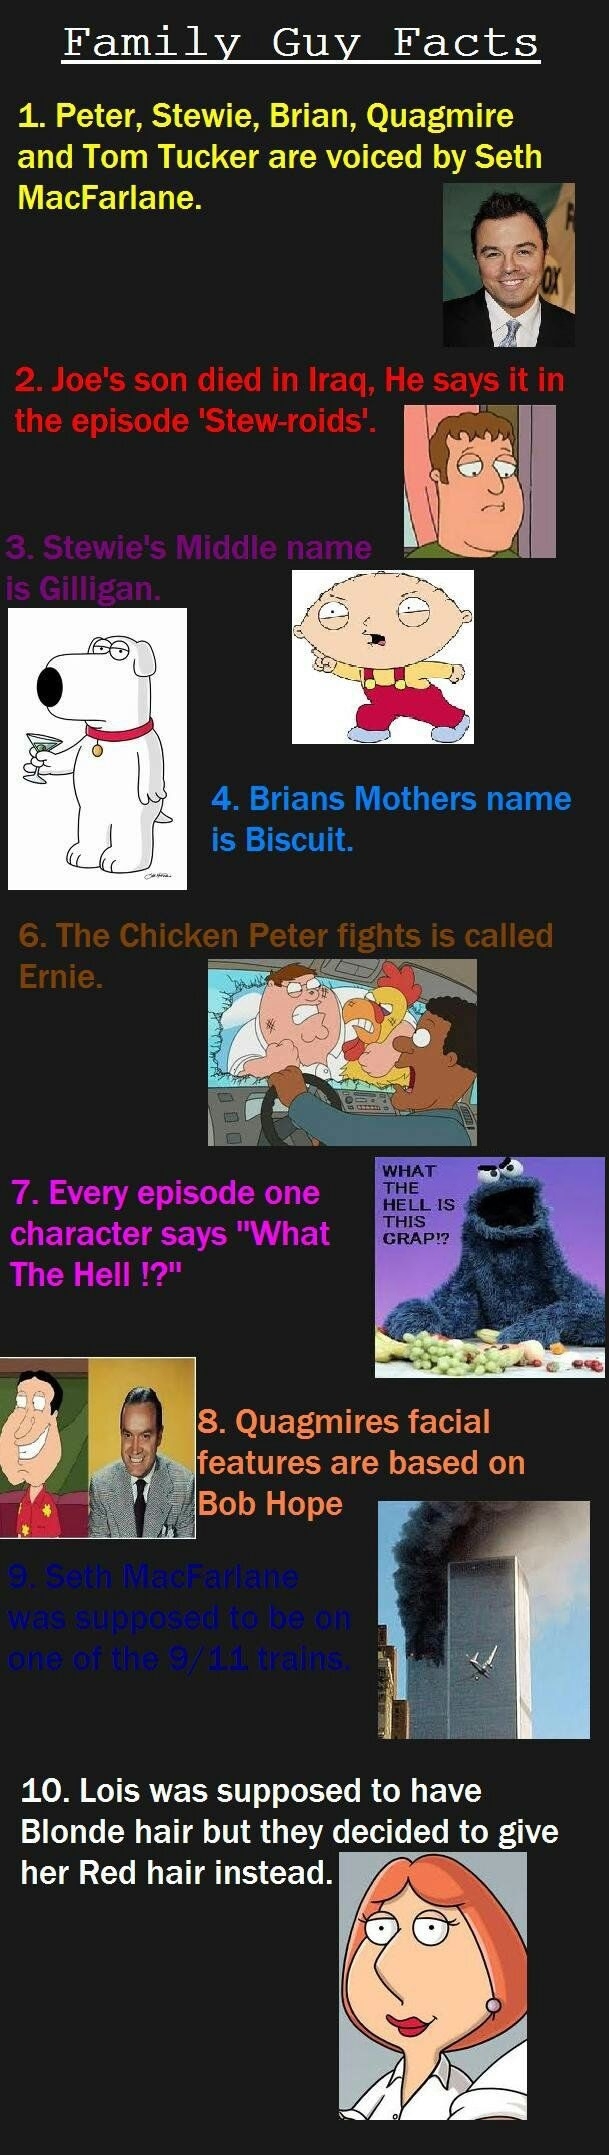 Family Guy Facts